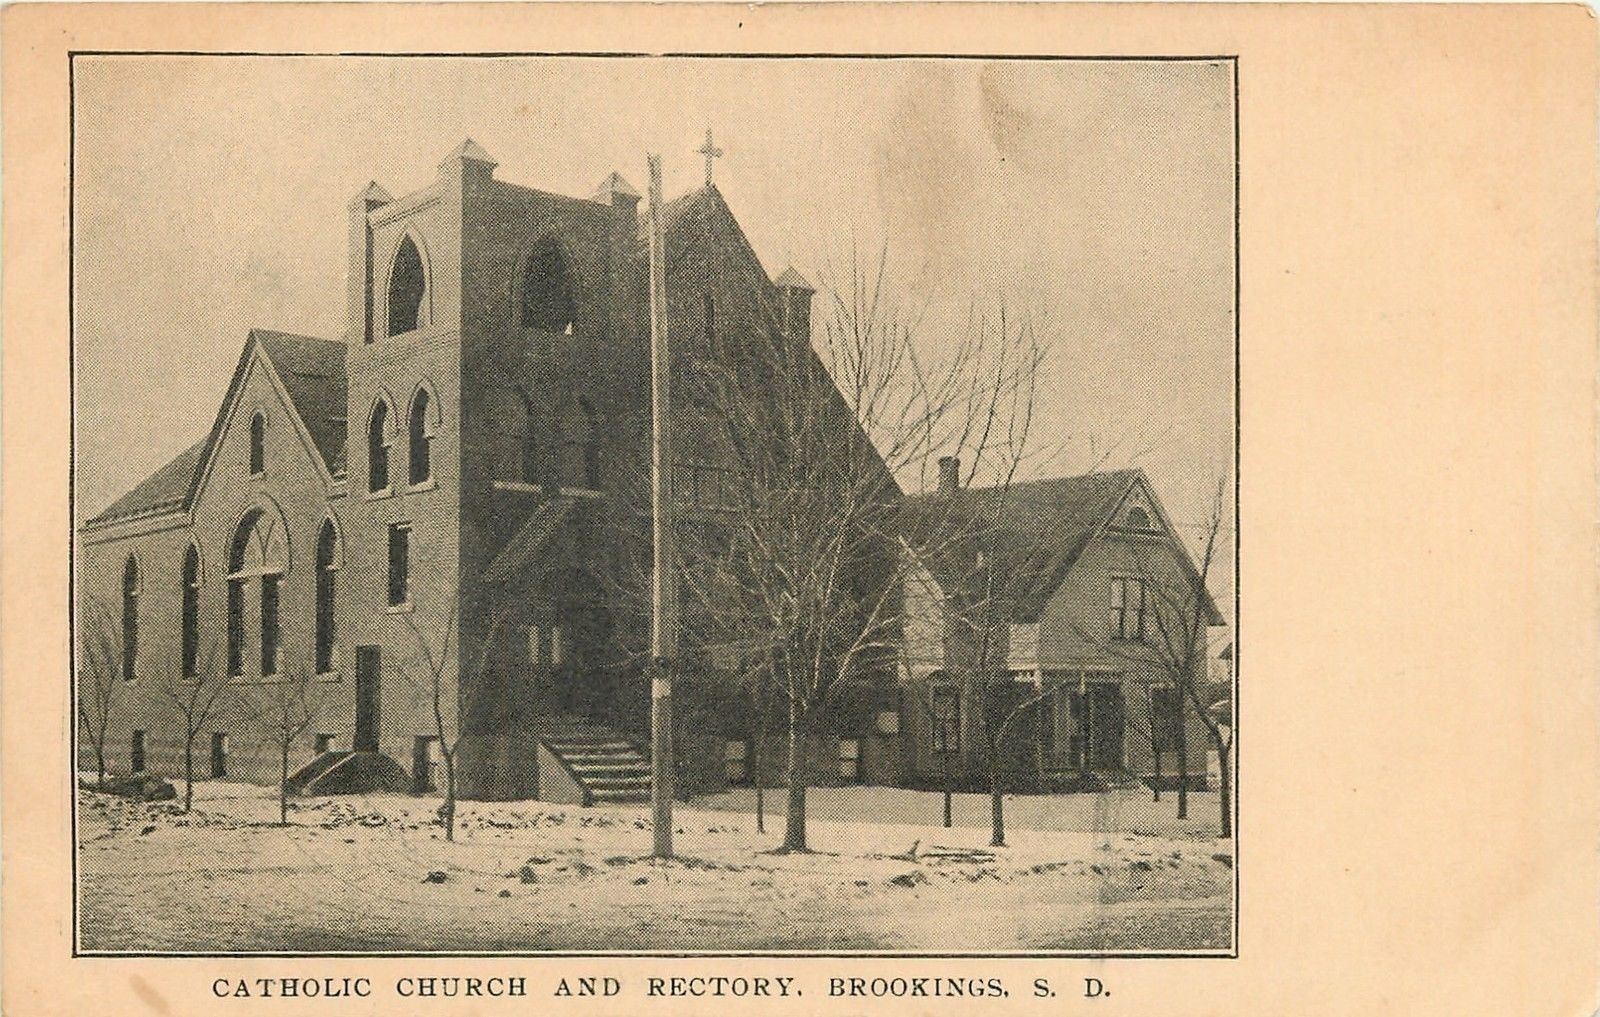 Brookings SD Snow All Over Grounds of Catholic Church & Rectory~c1905 Postcard